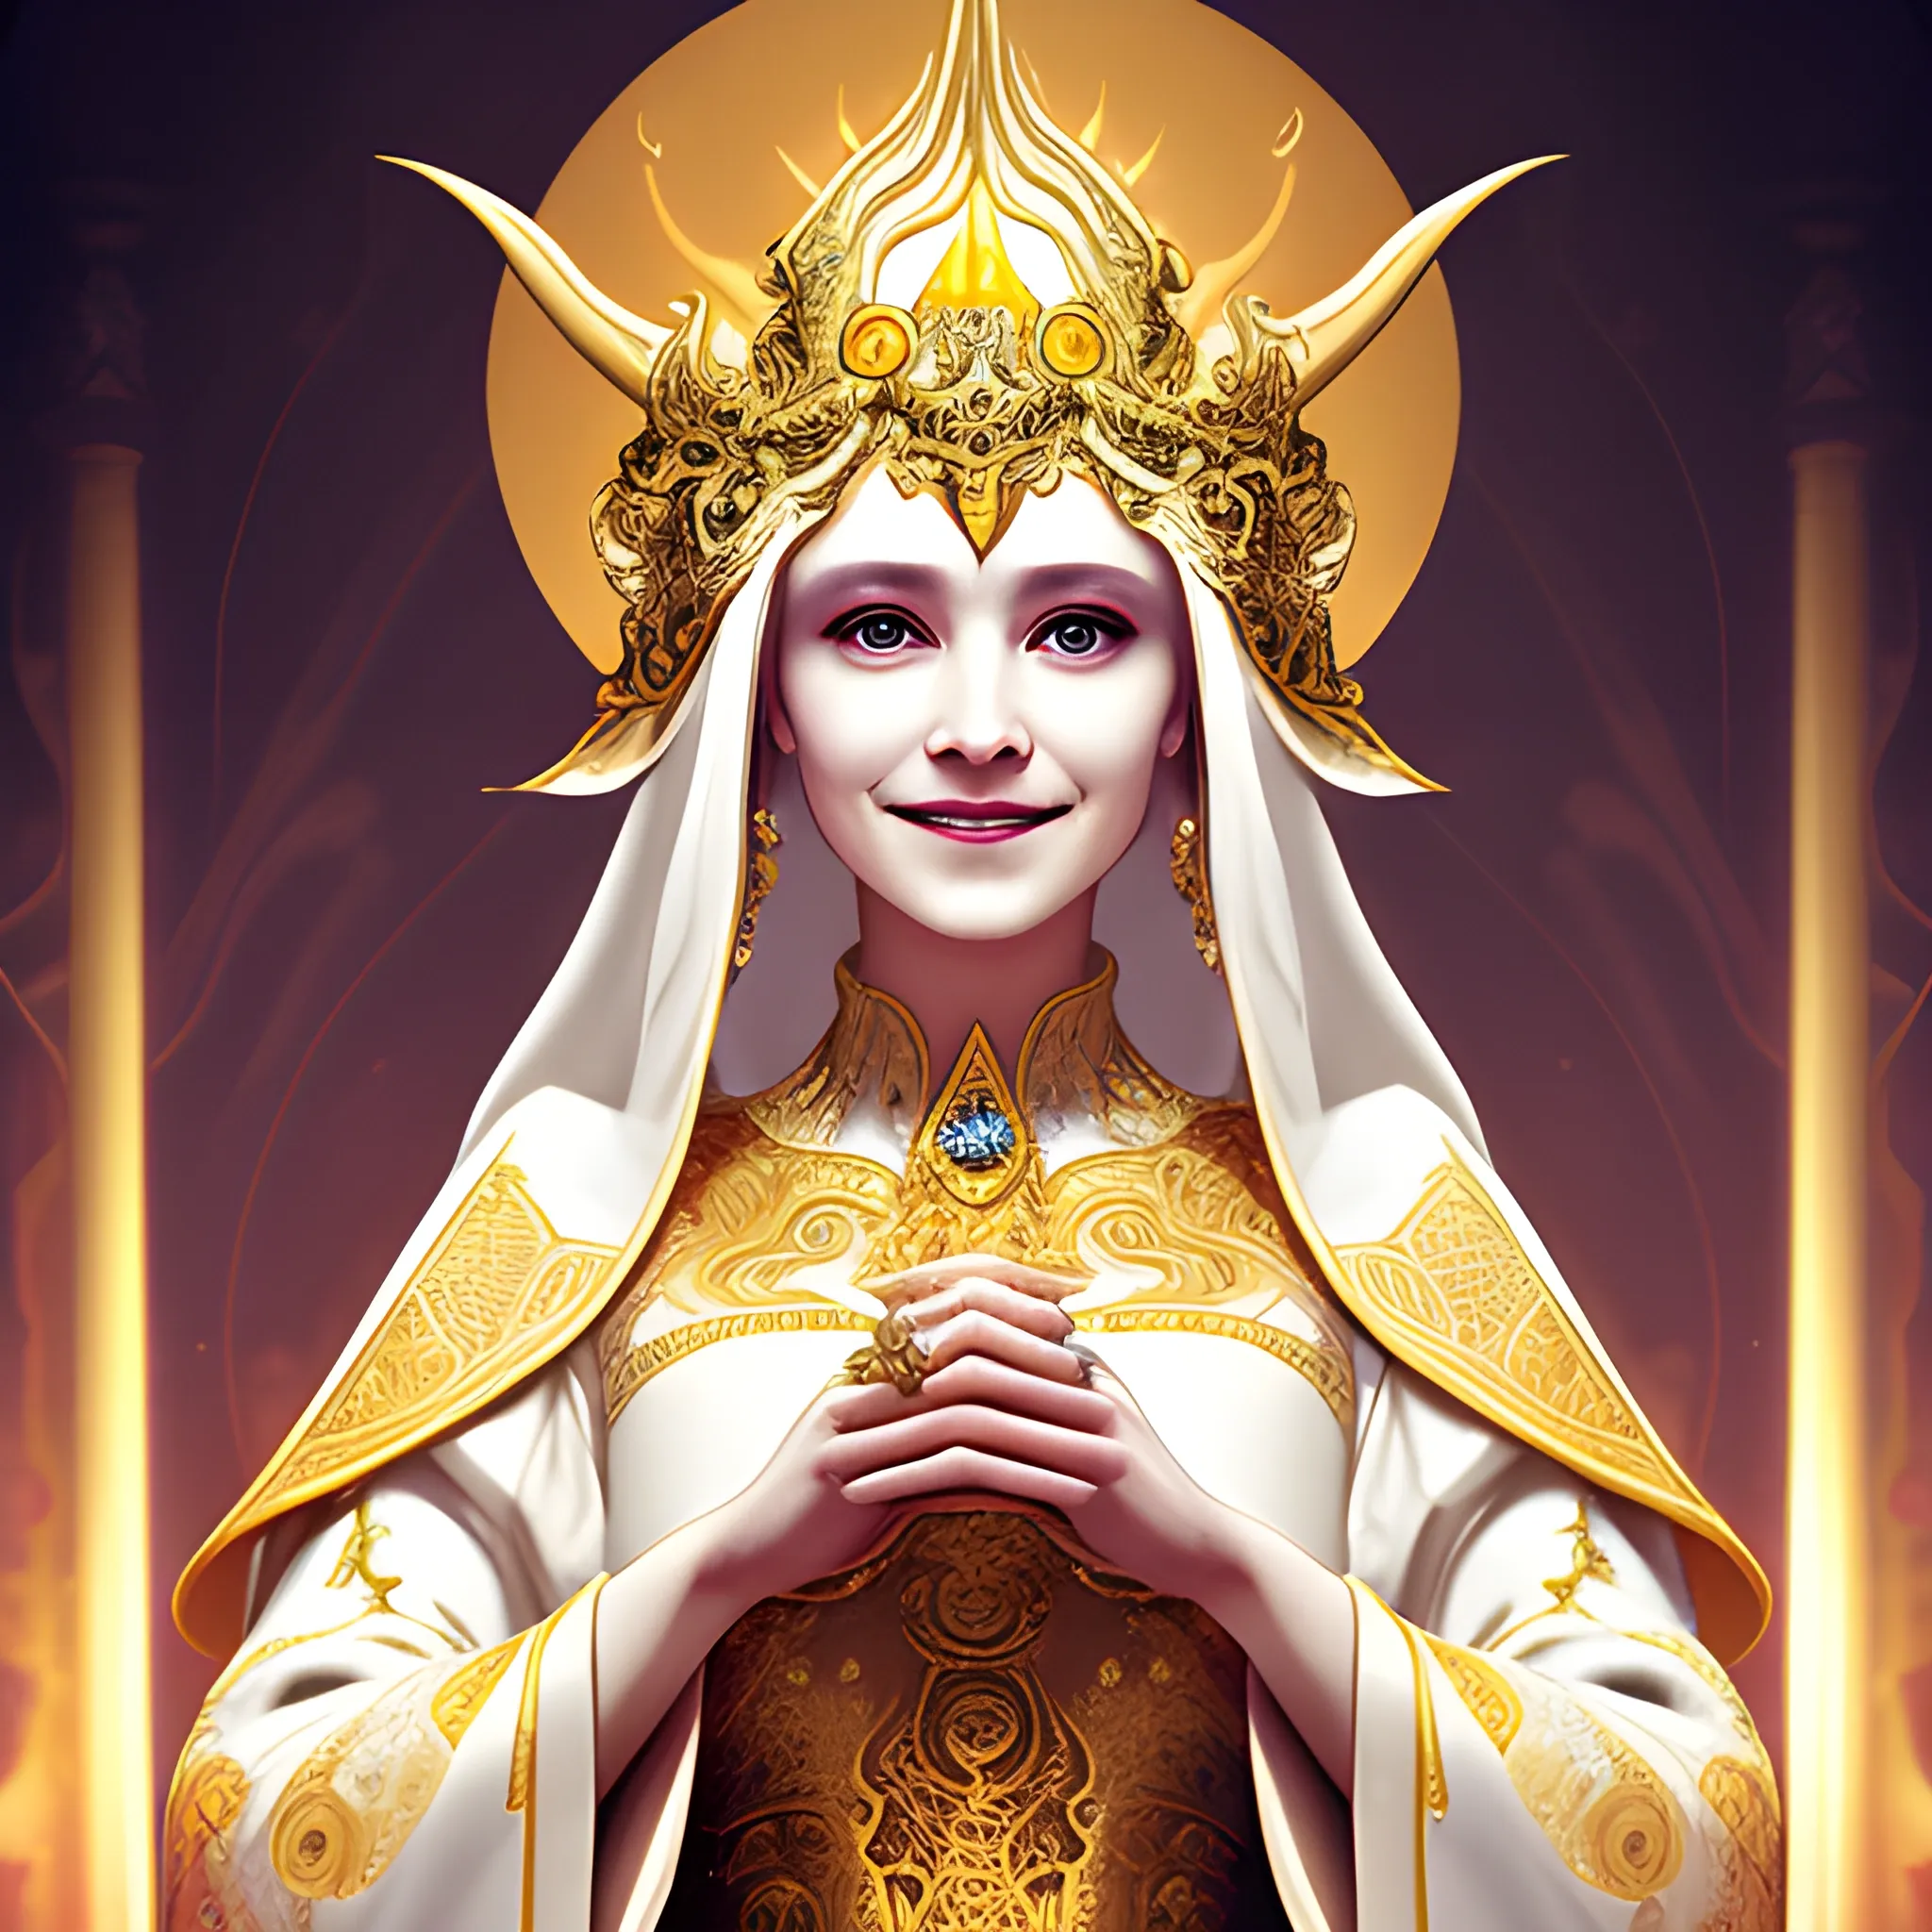 A female high priestess, wearing ornate white and golden gowns ...